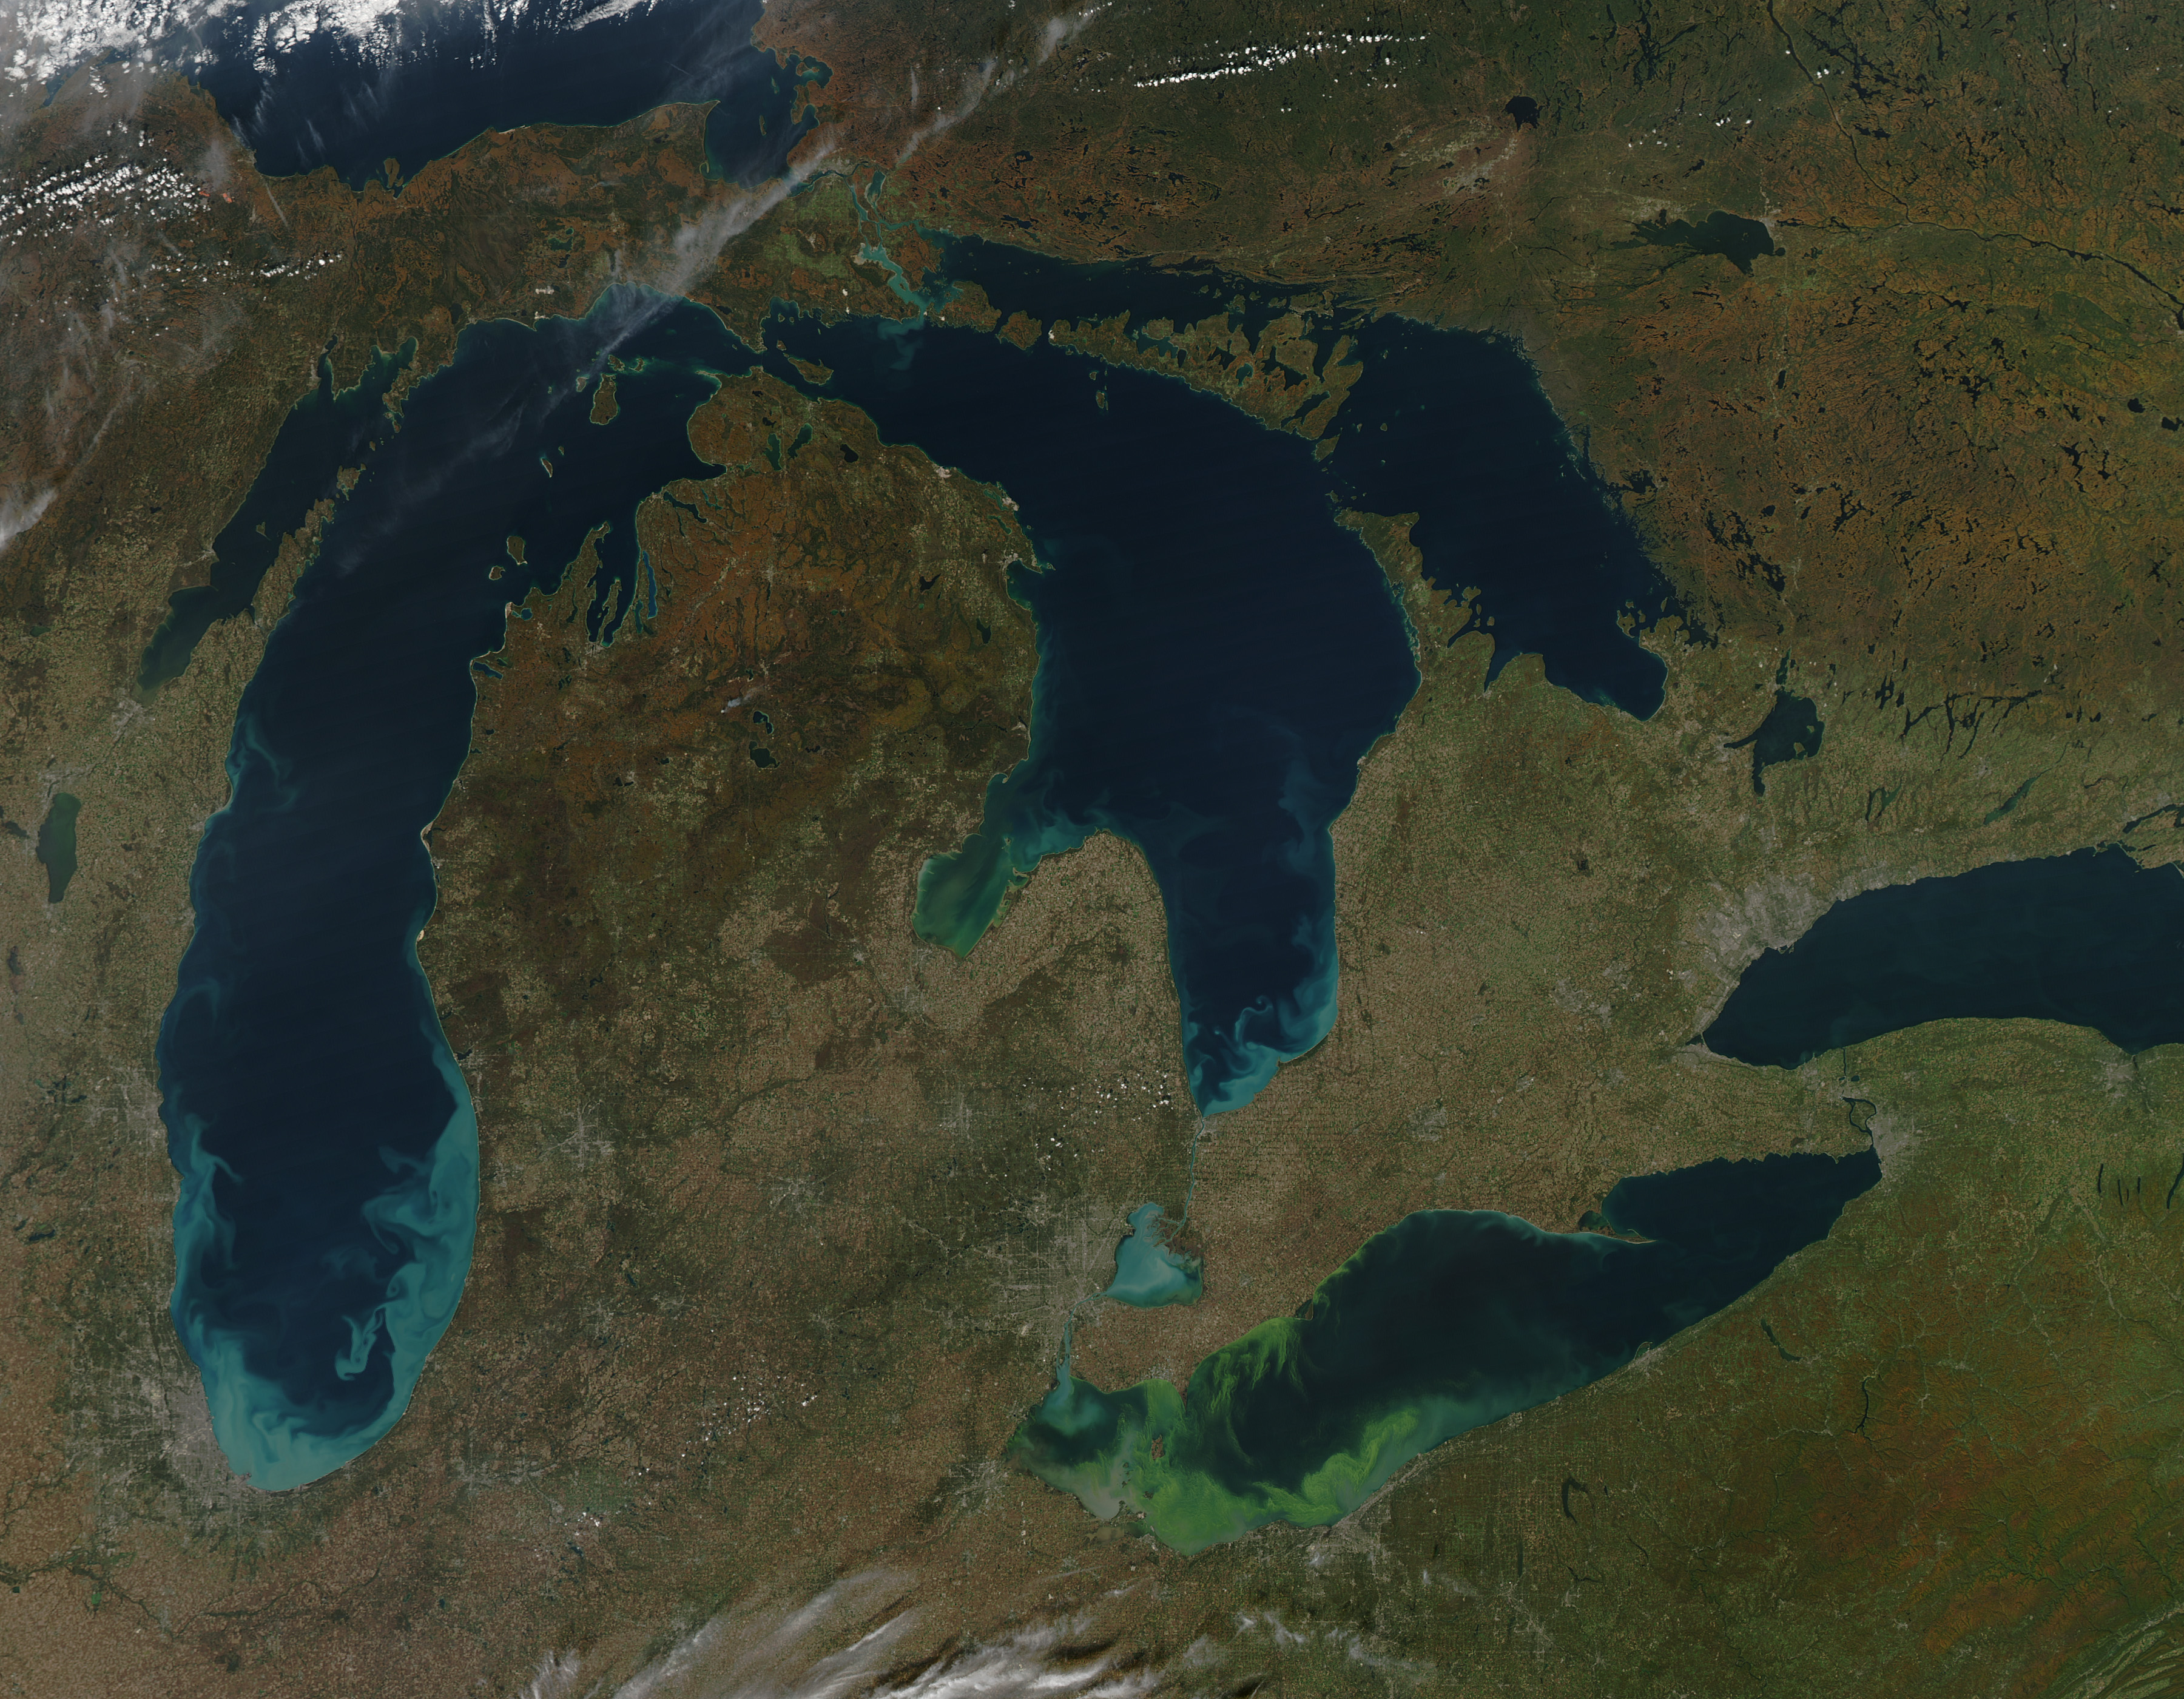 Sediment and Algae Color the Great Lakes - related image preview